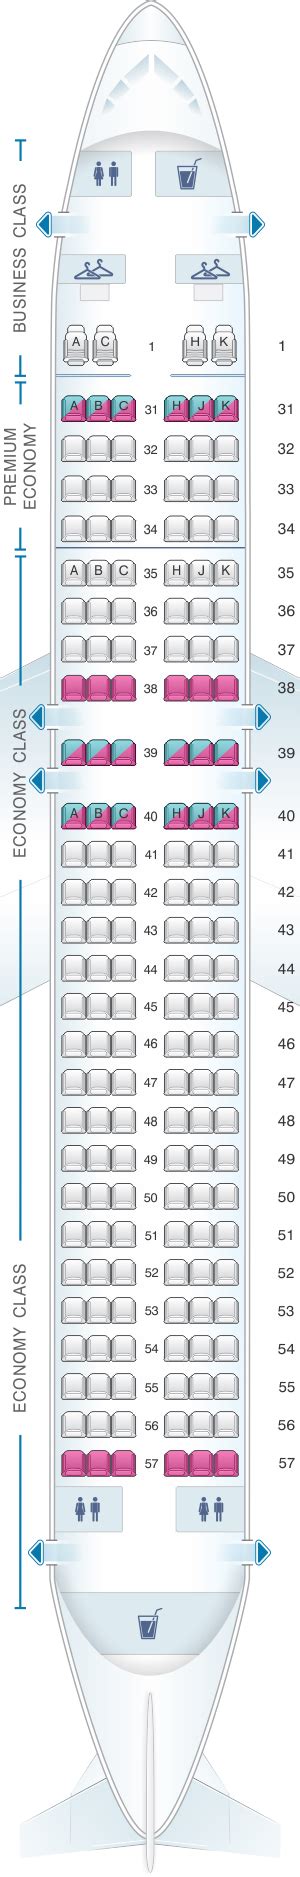 China Southern Airlines A320 Seat Map Cabinets Matttroy